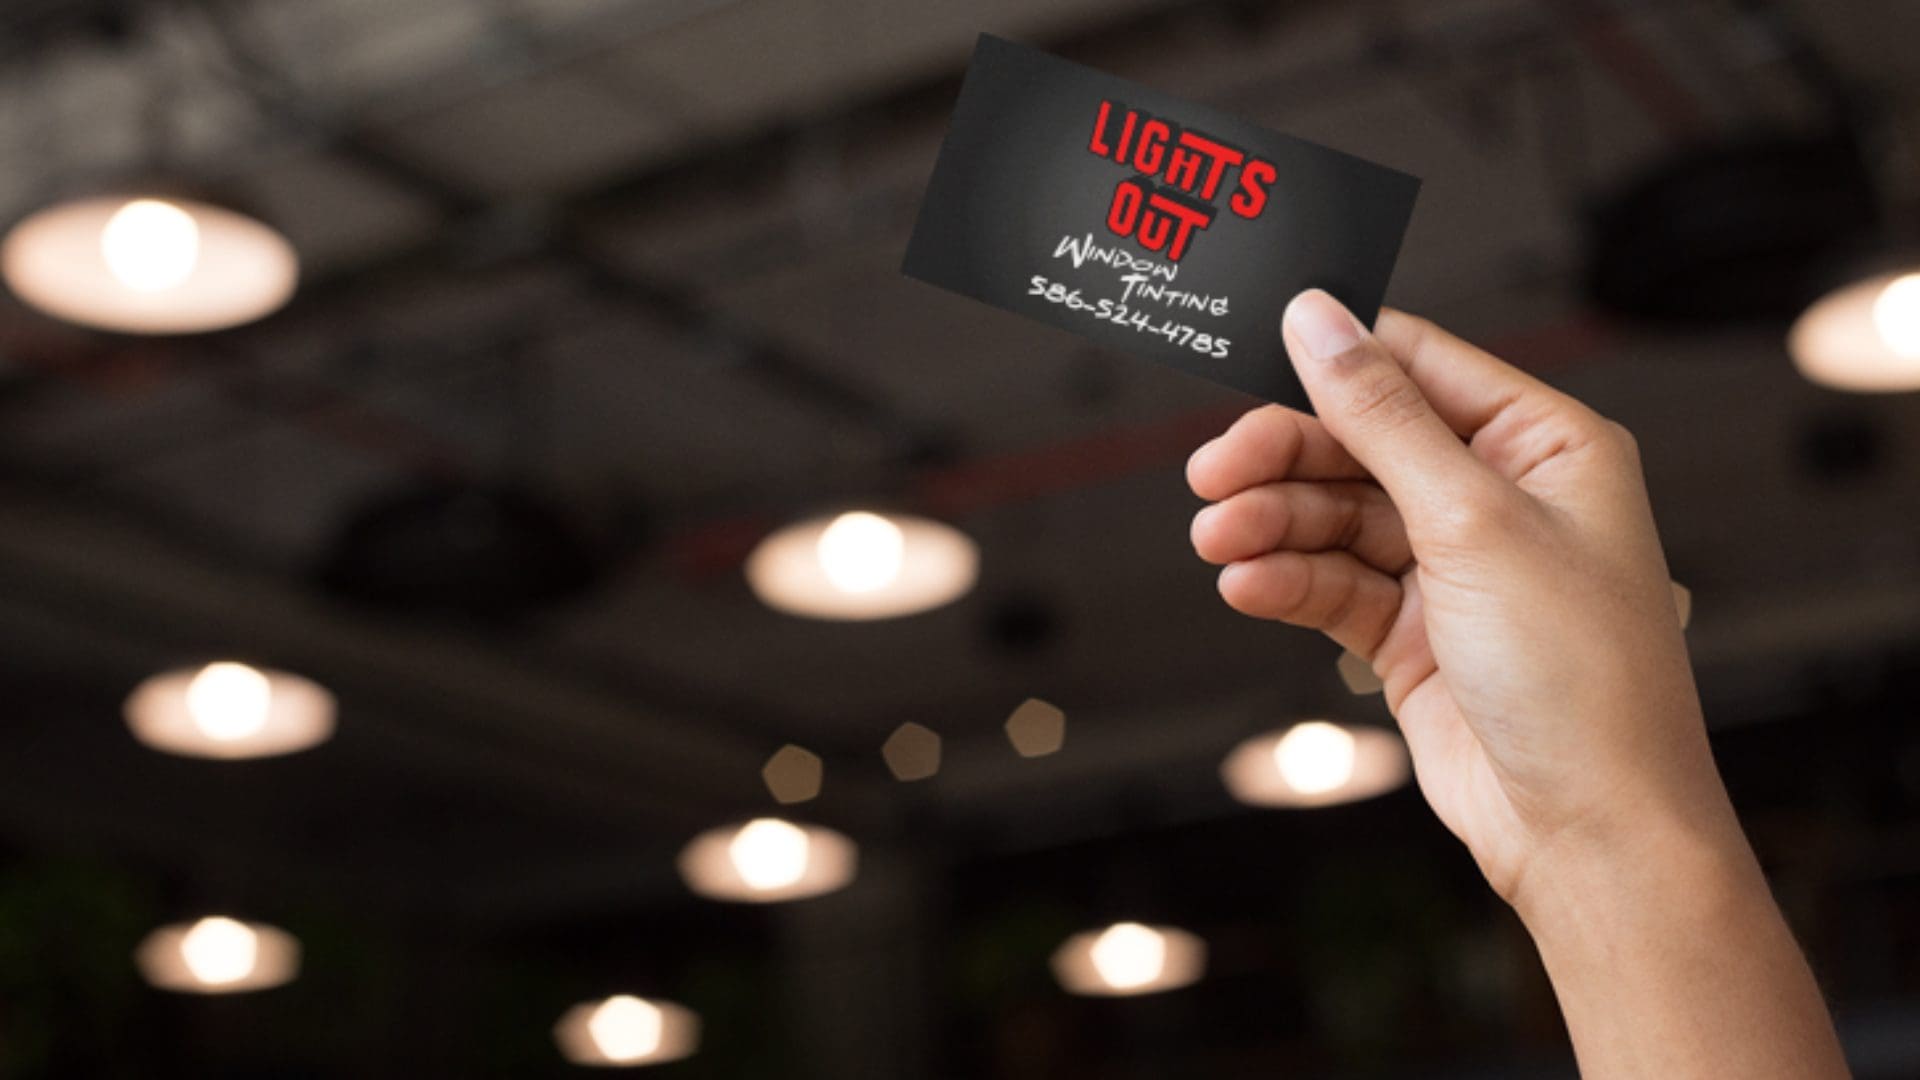 Lights Out Window Tinting - Business Card Mockup (6)